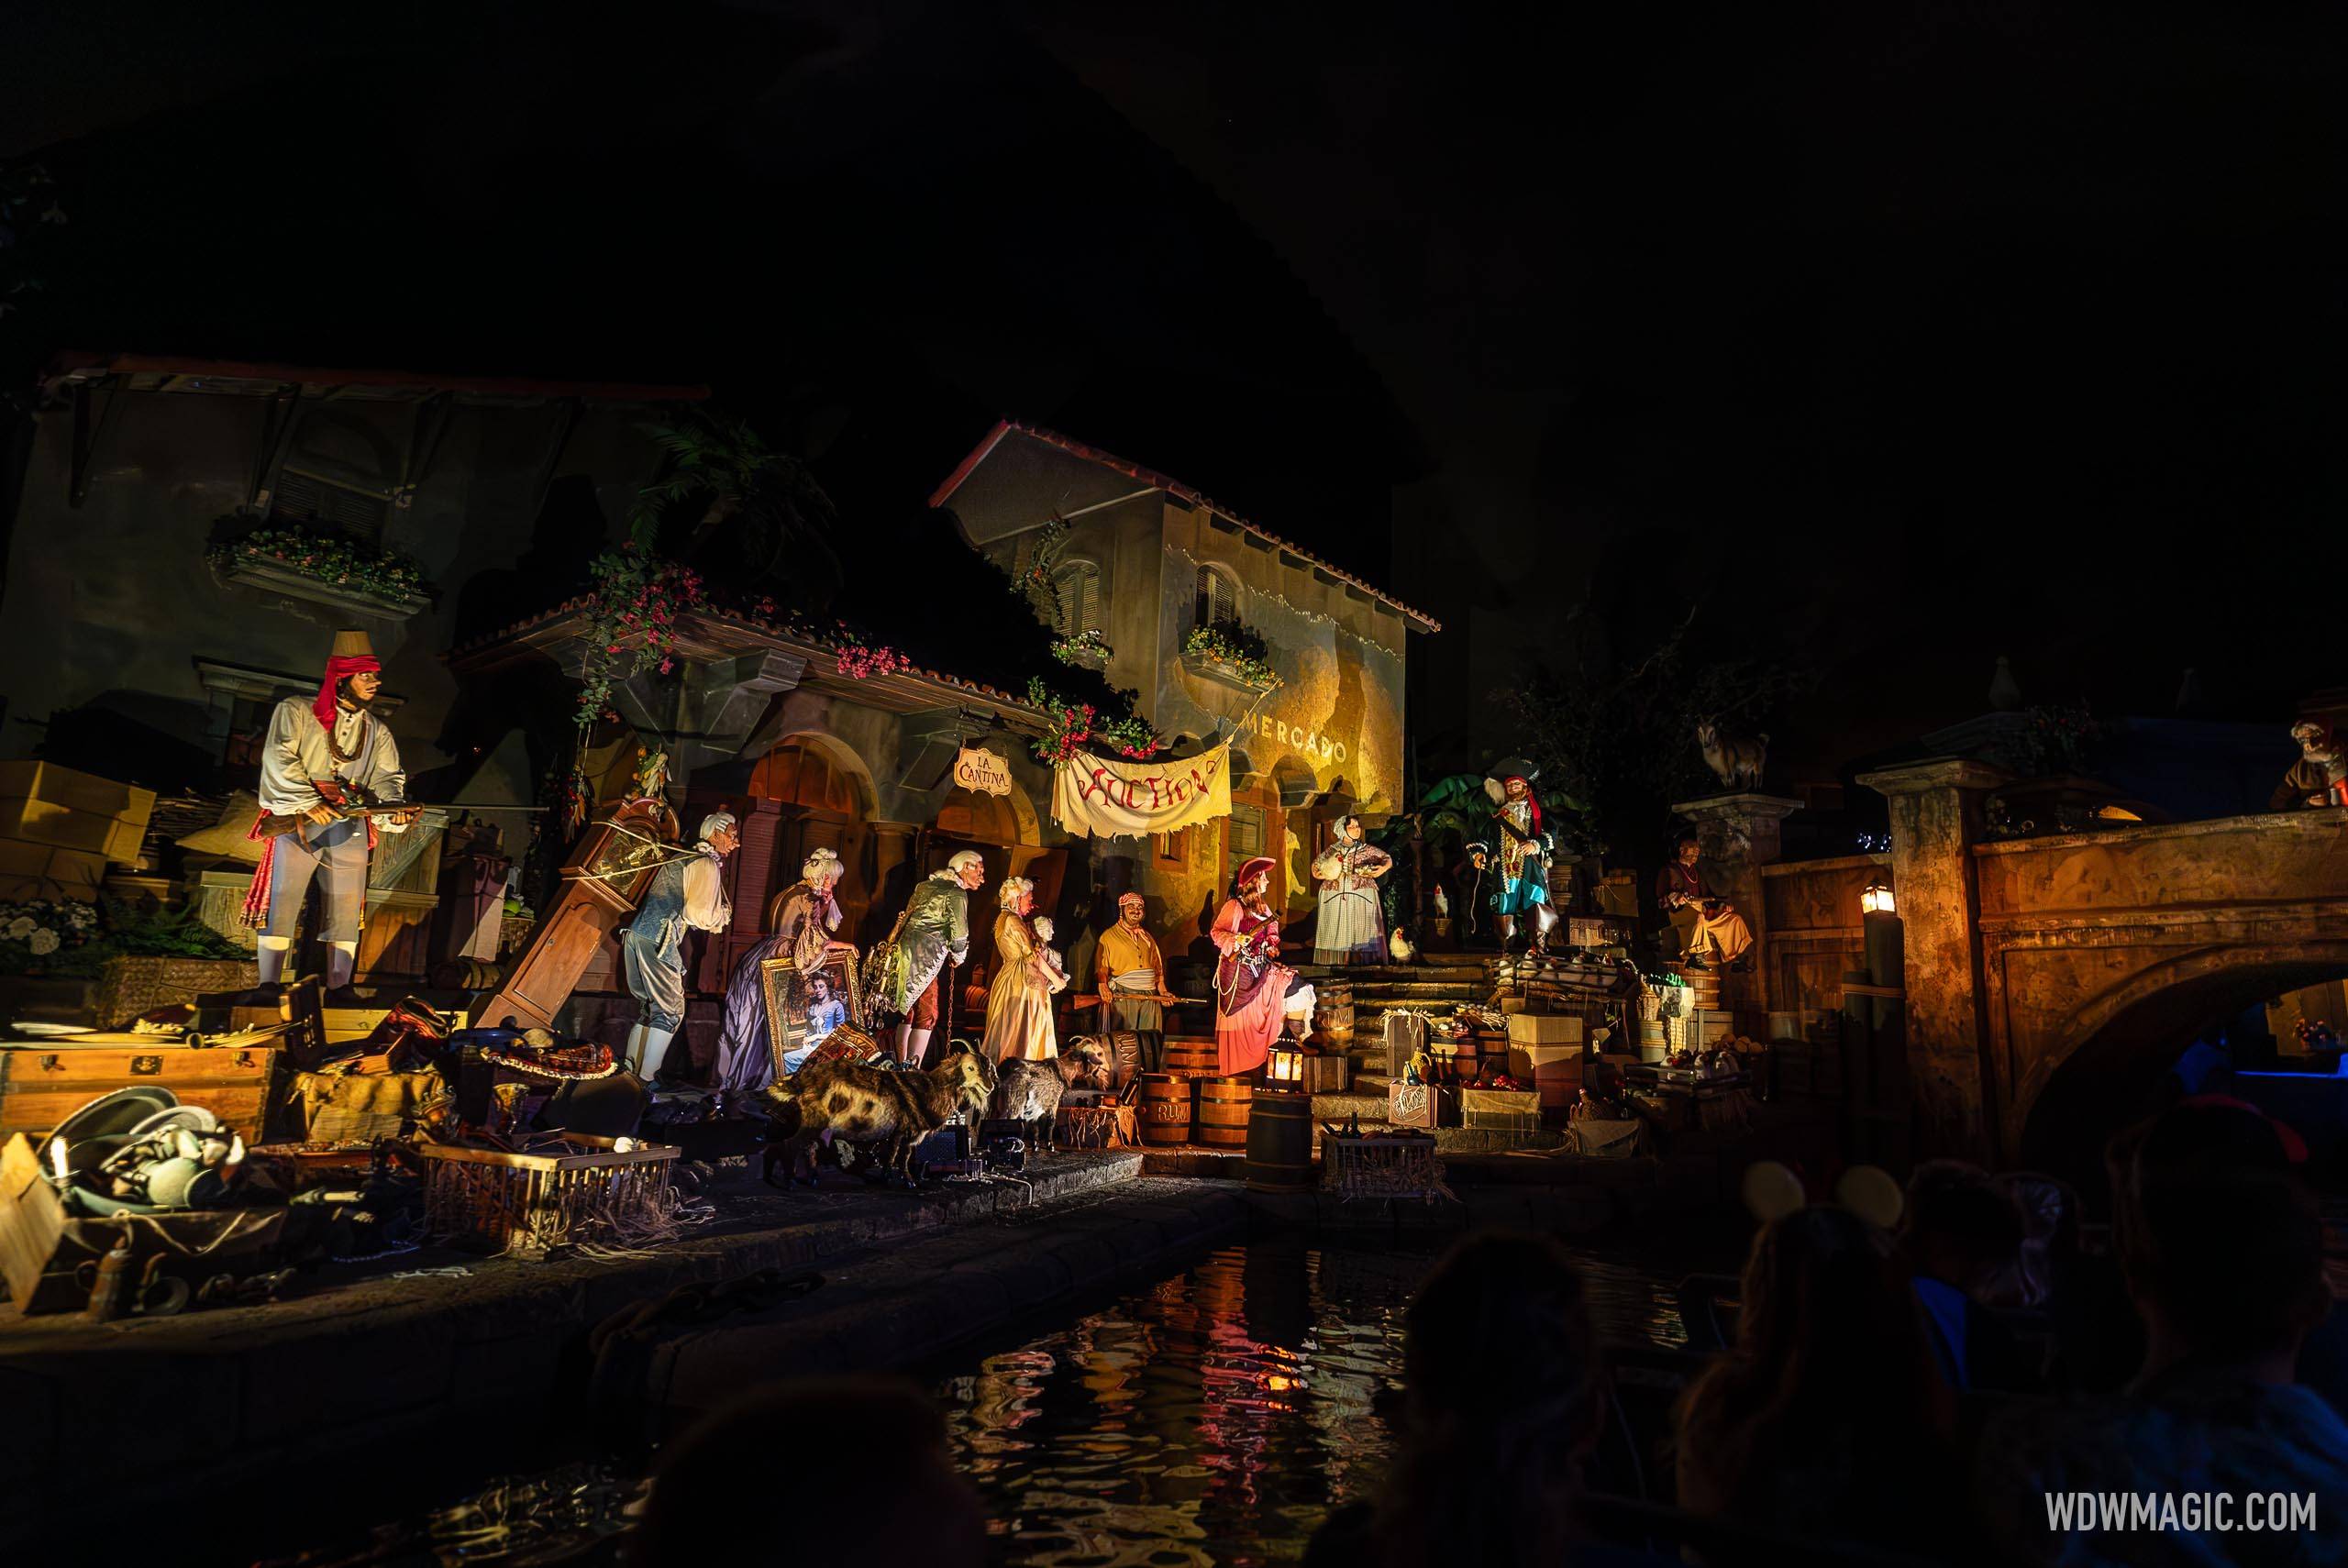 Angelica from 'Pirates of the Caribbean - On Stranger Tides' to meet and greet at the Magic Kingdom